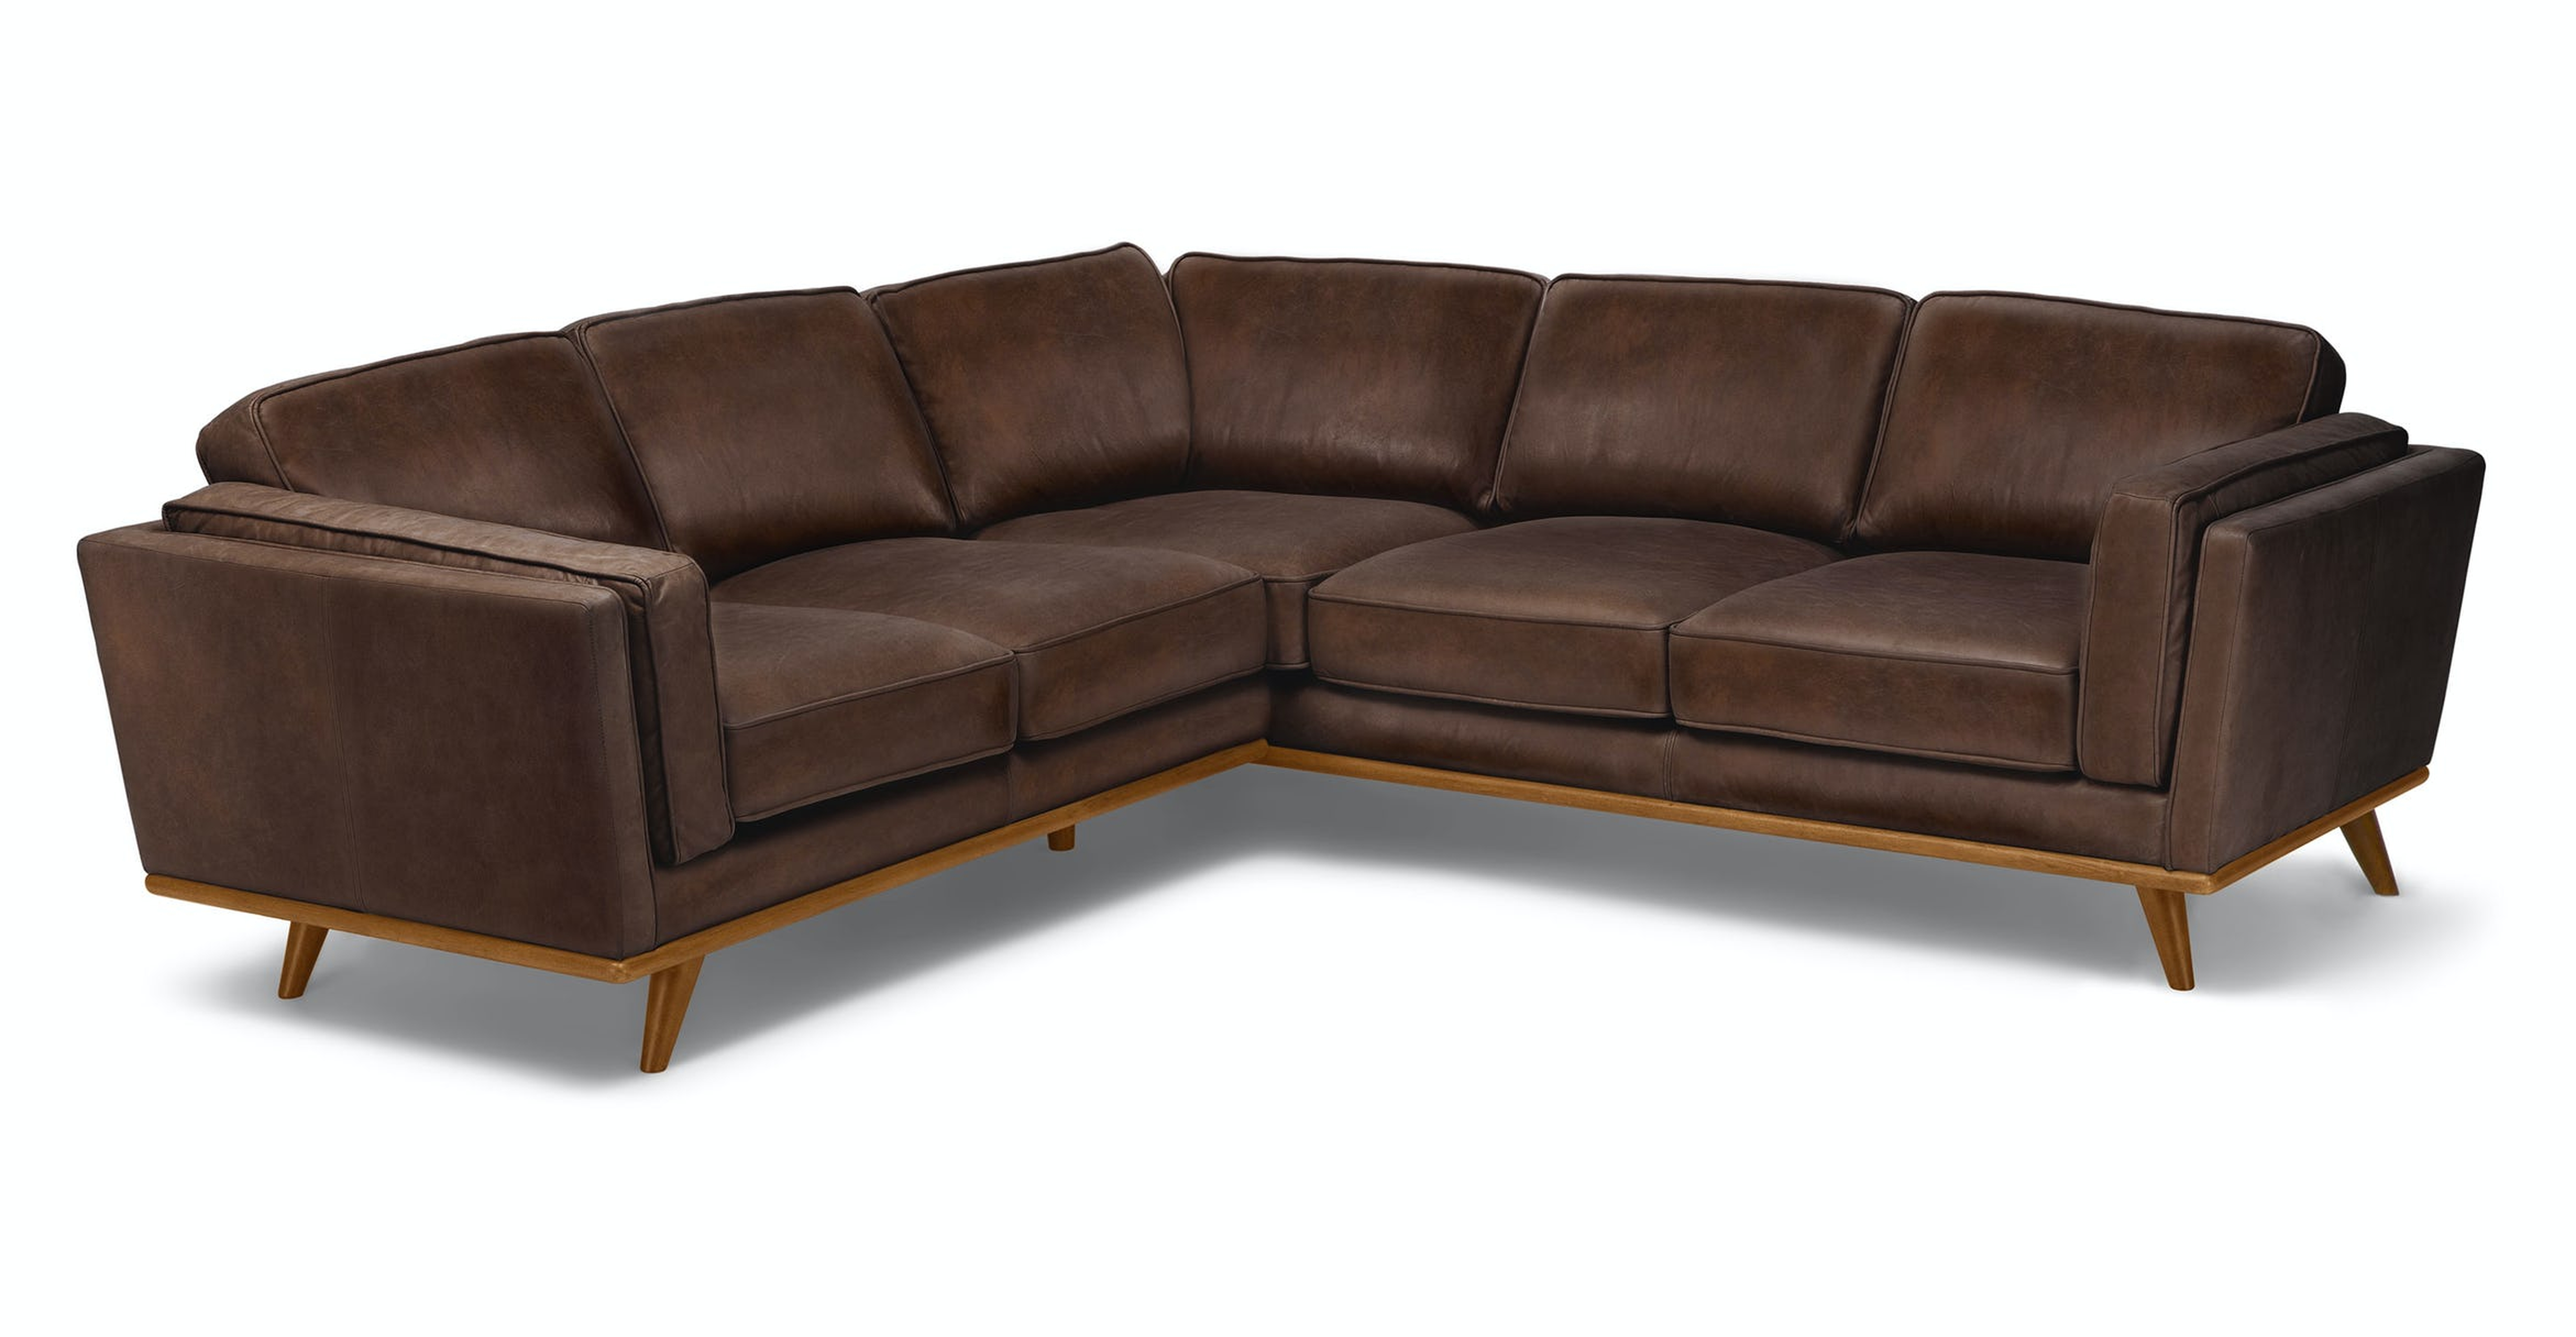 Timber Charme Chocolat Corner Sectional - Article